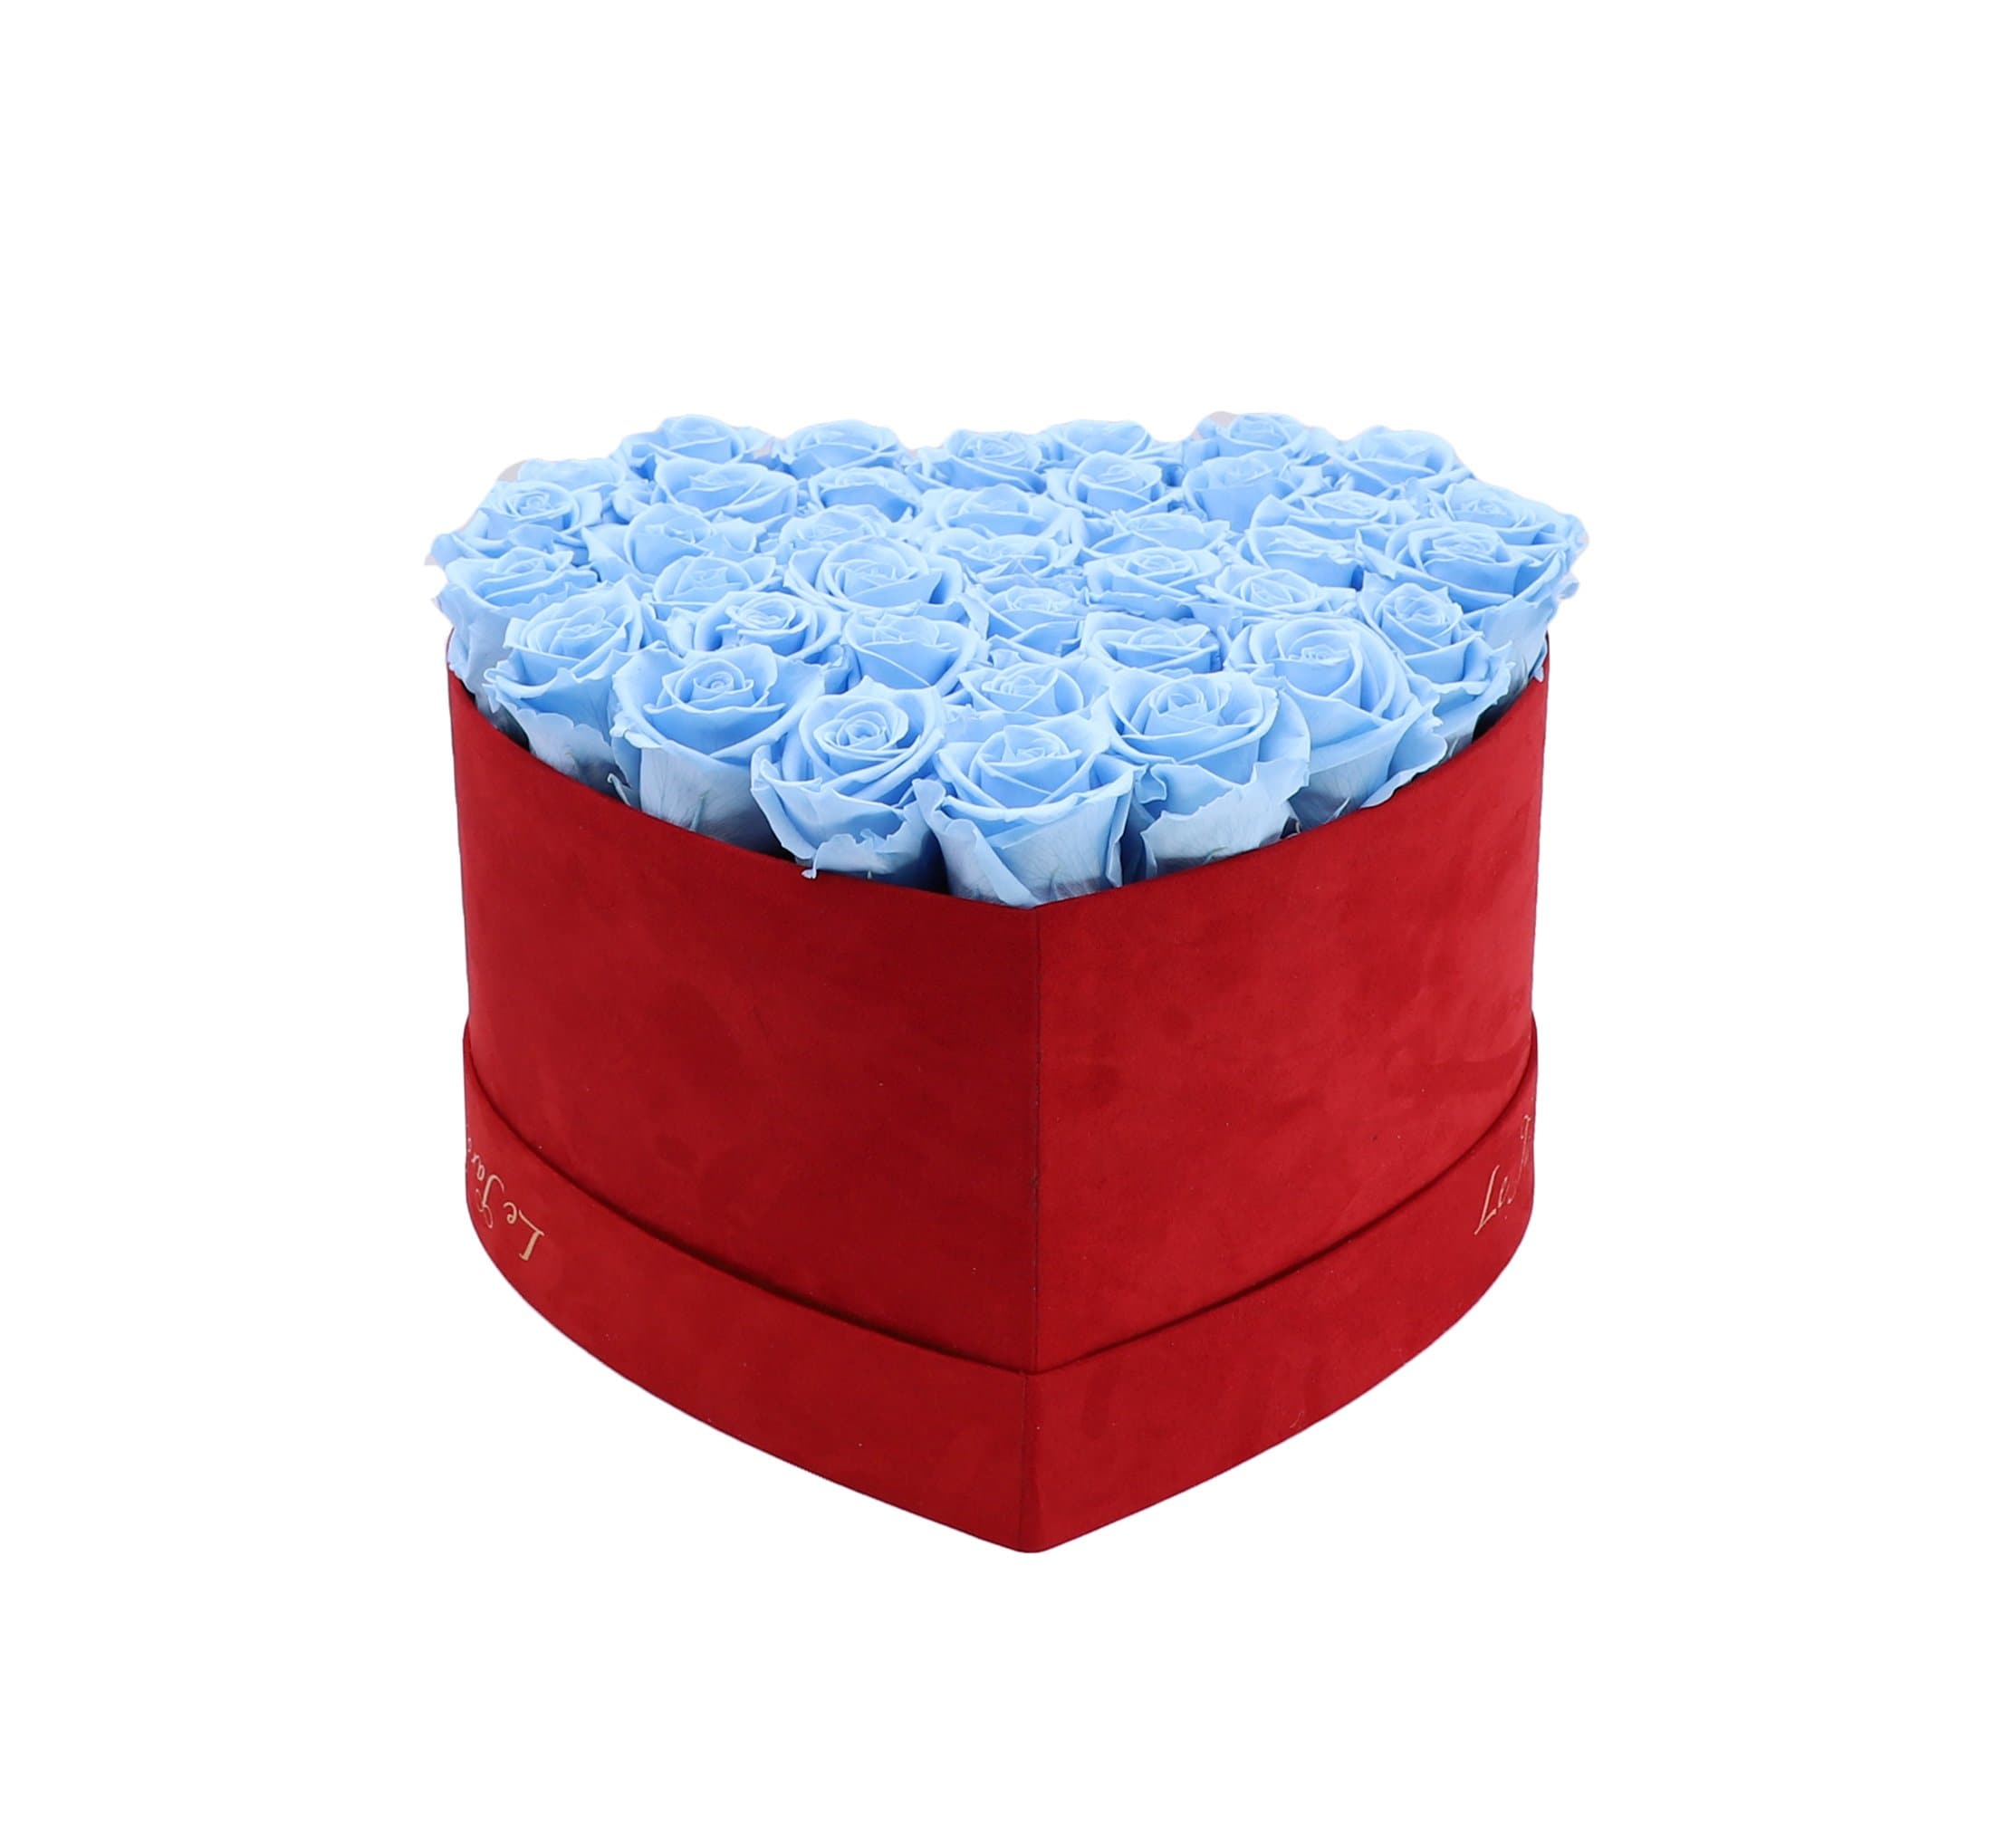 Light Blue Preserved Roses in A Heart Shaped Box- Small Heart Luxury Red Suede Box - Le Jardin Infini Roses in a Box